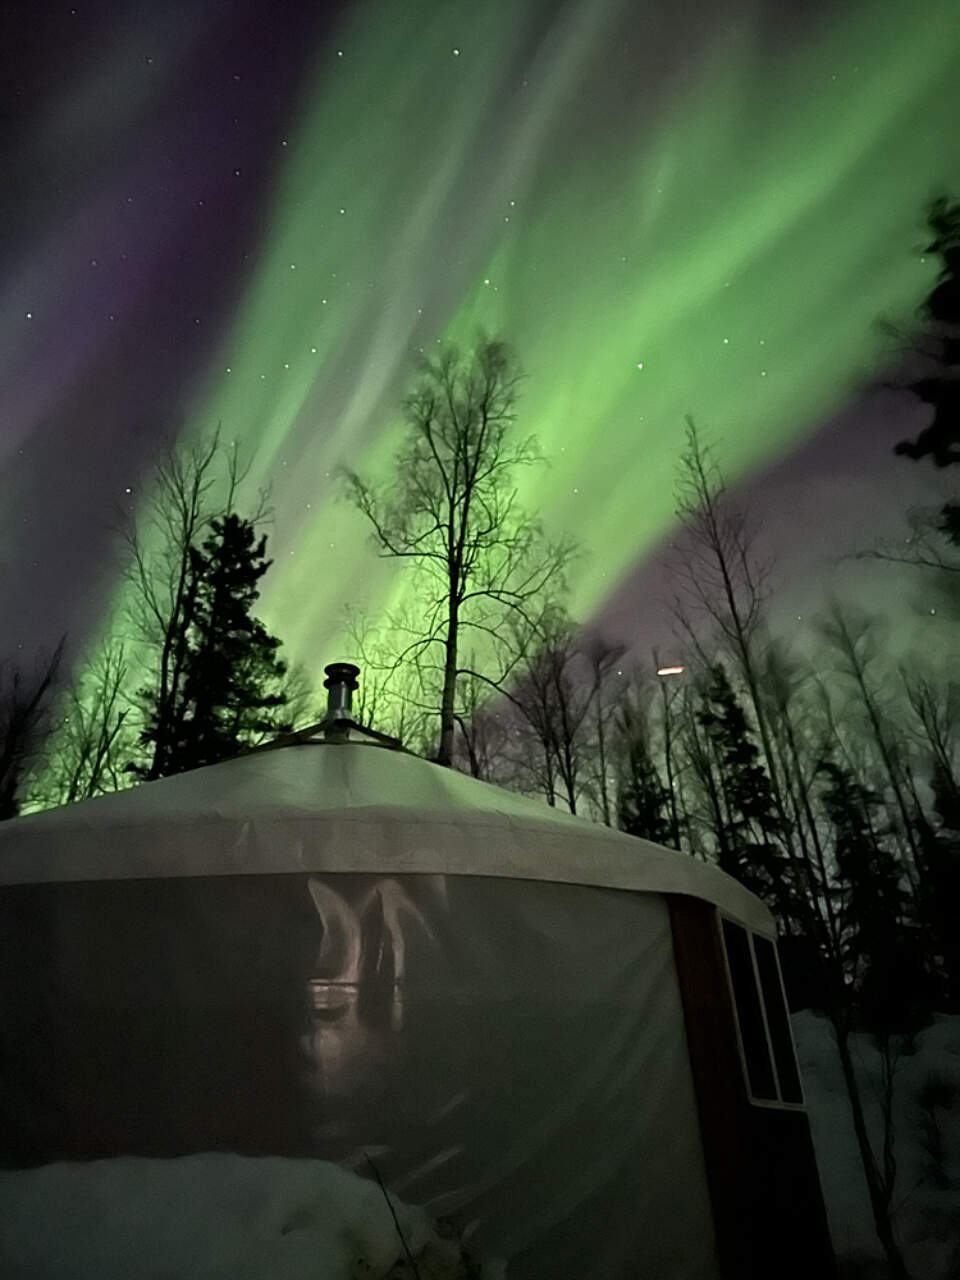 Sleep beneath the winter sky with the chance to see the northern lights!